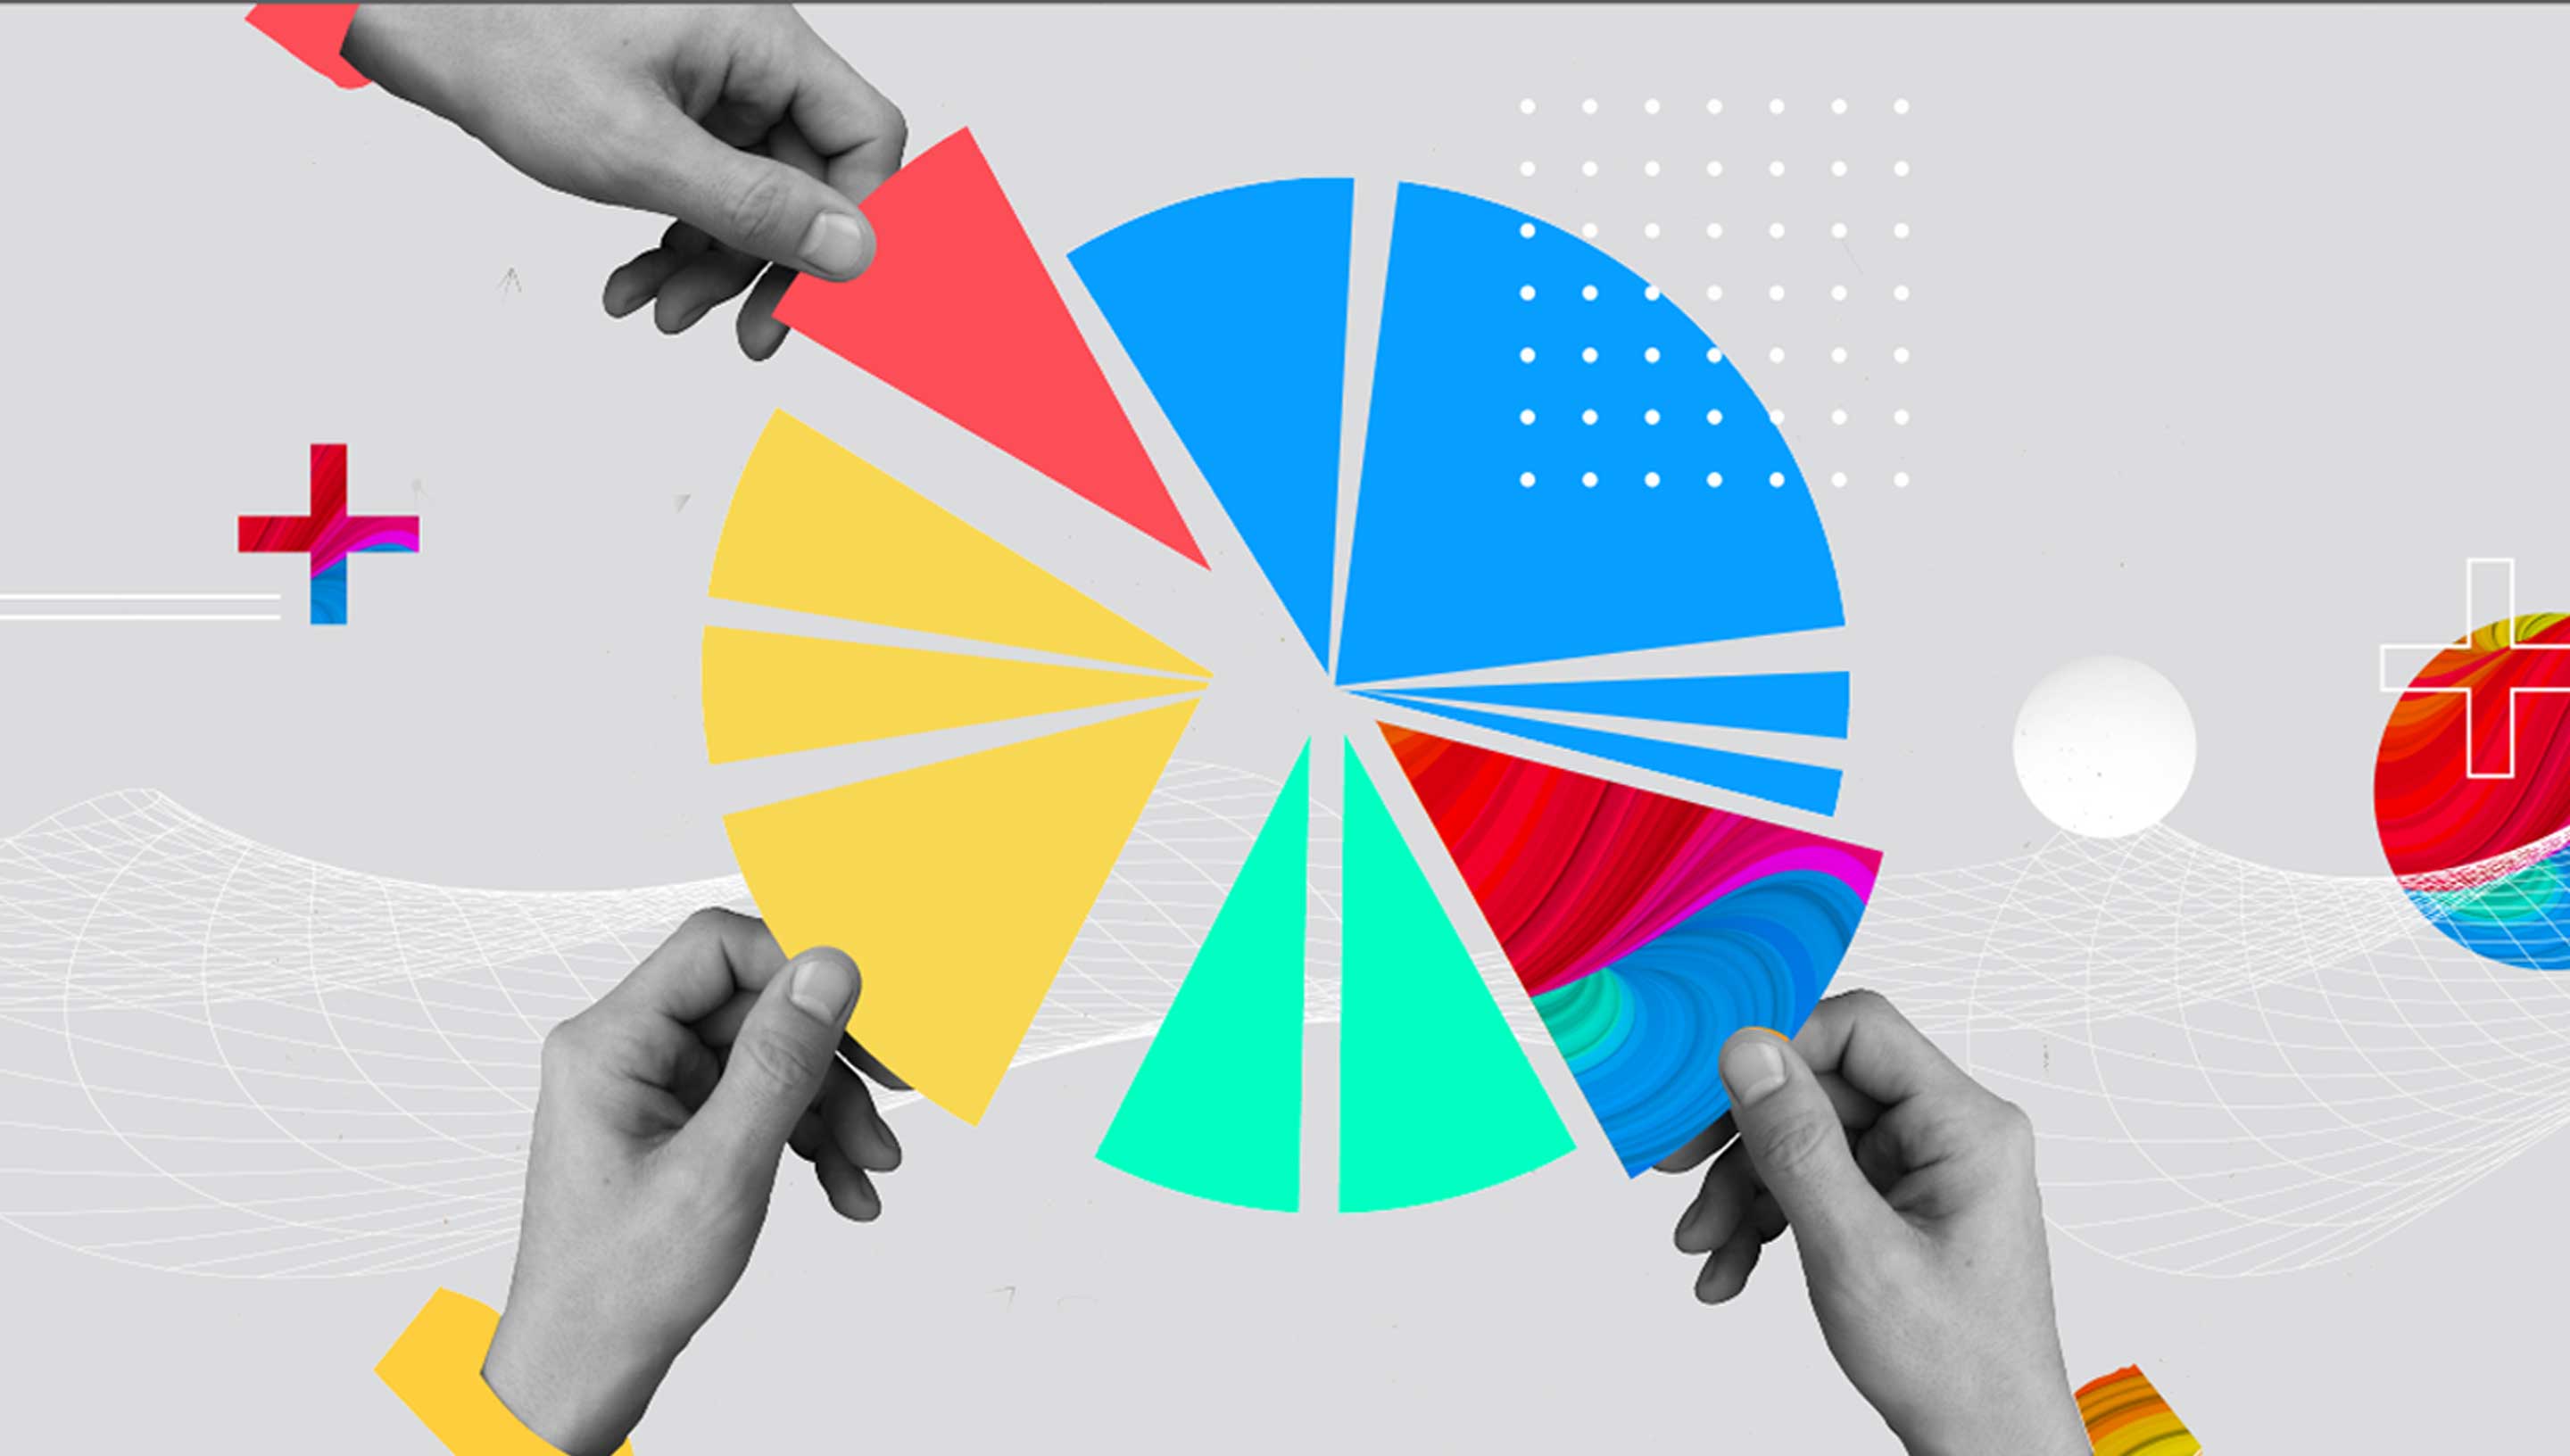 Various hands removing slices of a pie chart